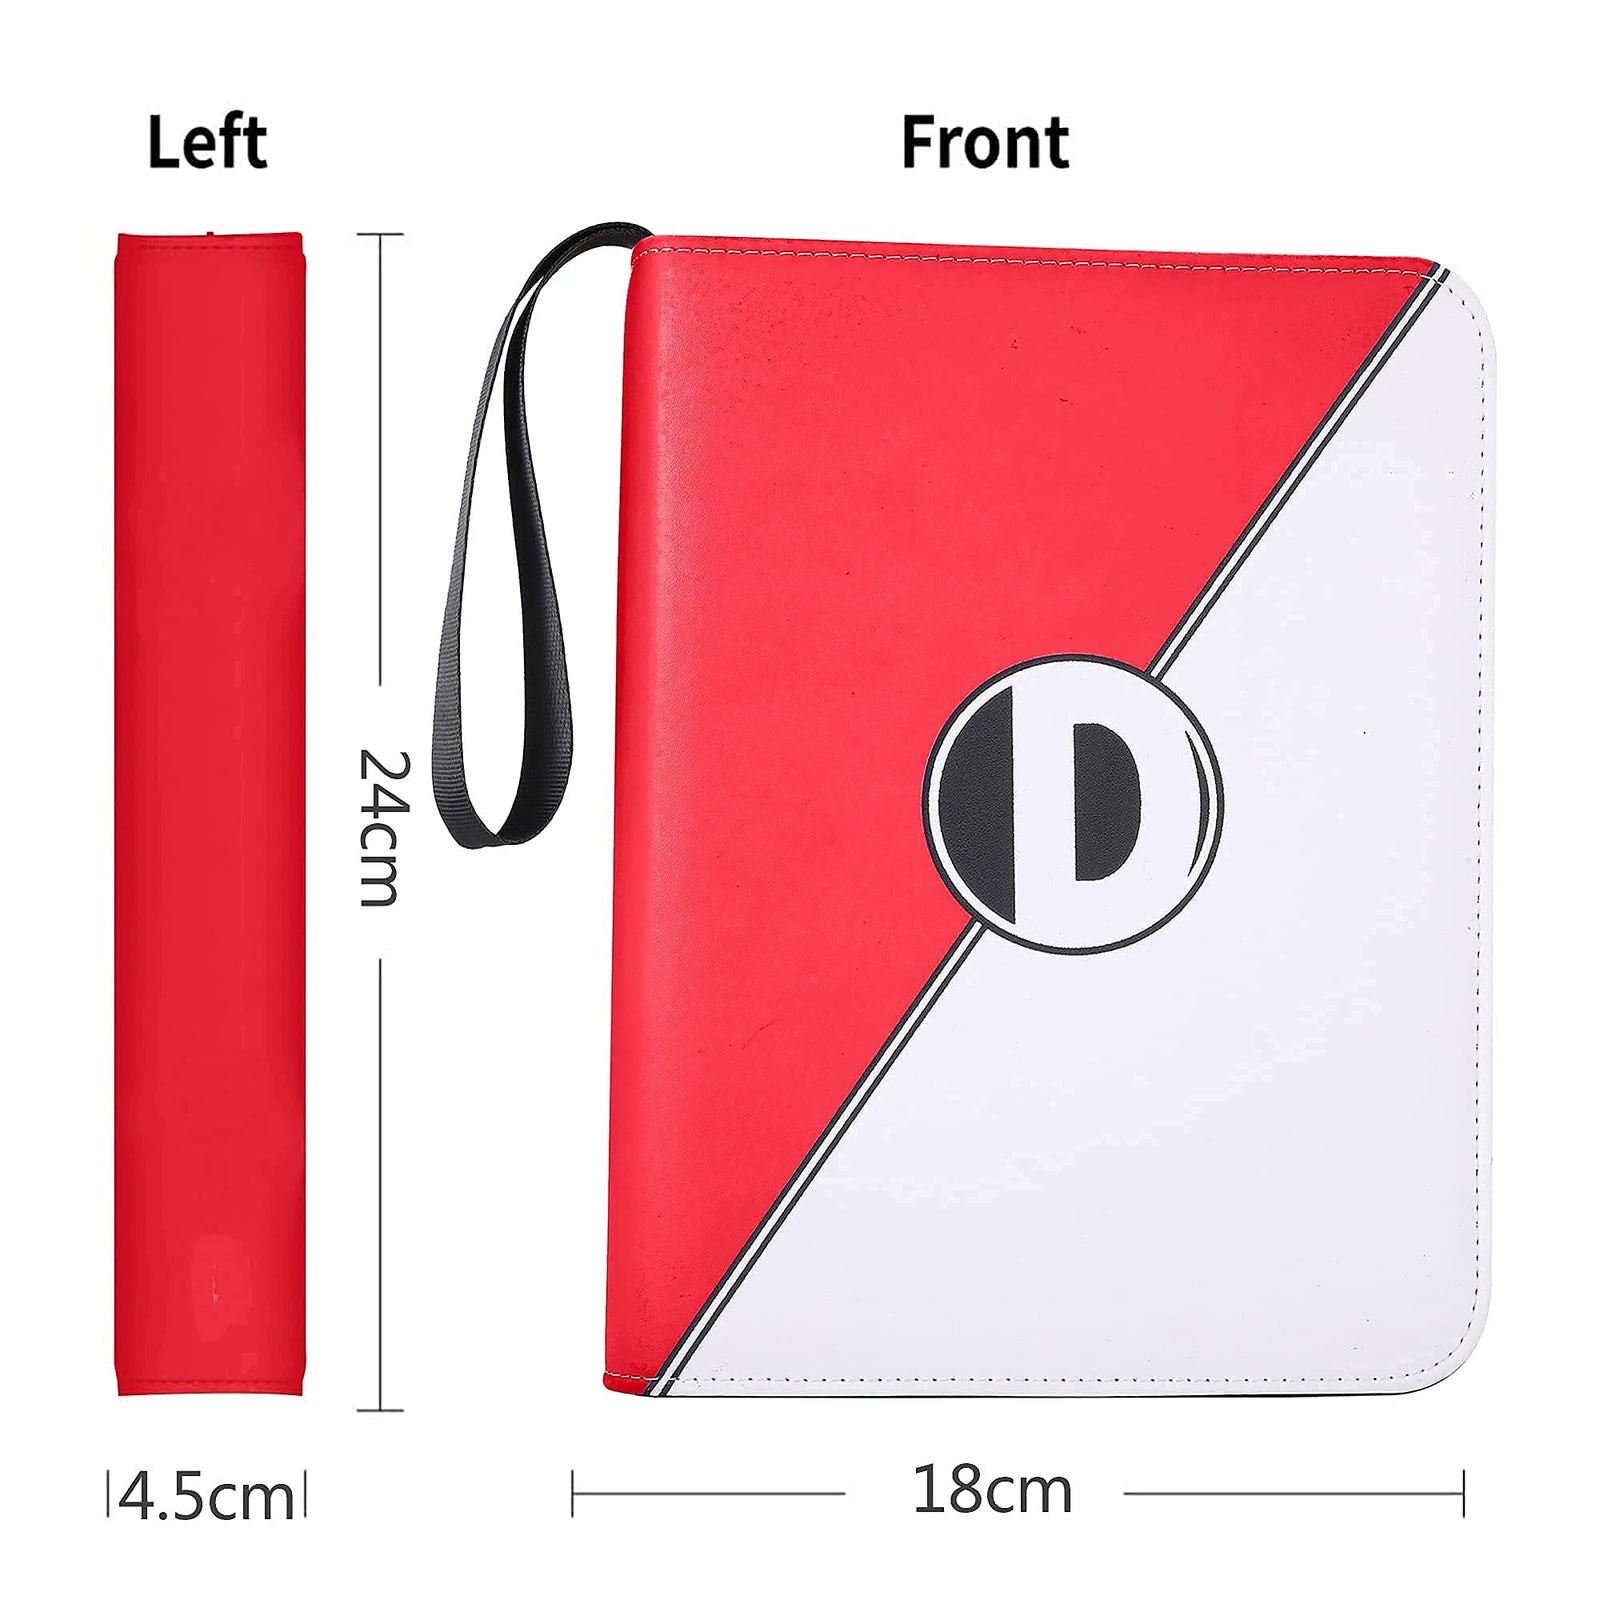 Binder for Pokemon Cards with Sleeves, Card Binder Holder Book Compatible with Pokémon Trading Cards, Holds Up to 400 Cards, 50 Pcs 4-Pocket Pages, Card Collector Album with Zipper Carrying Case